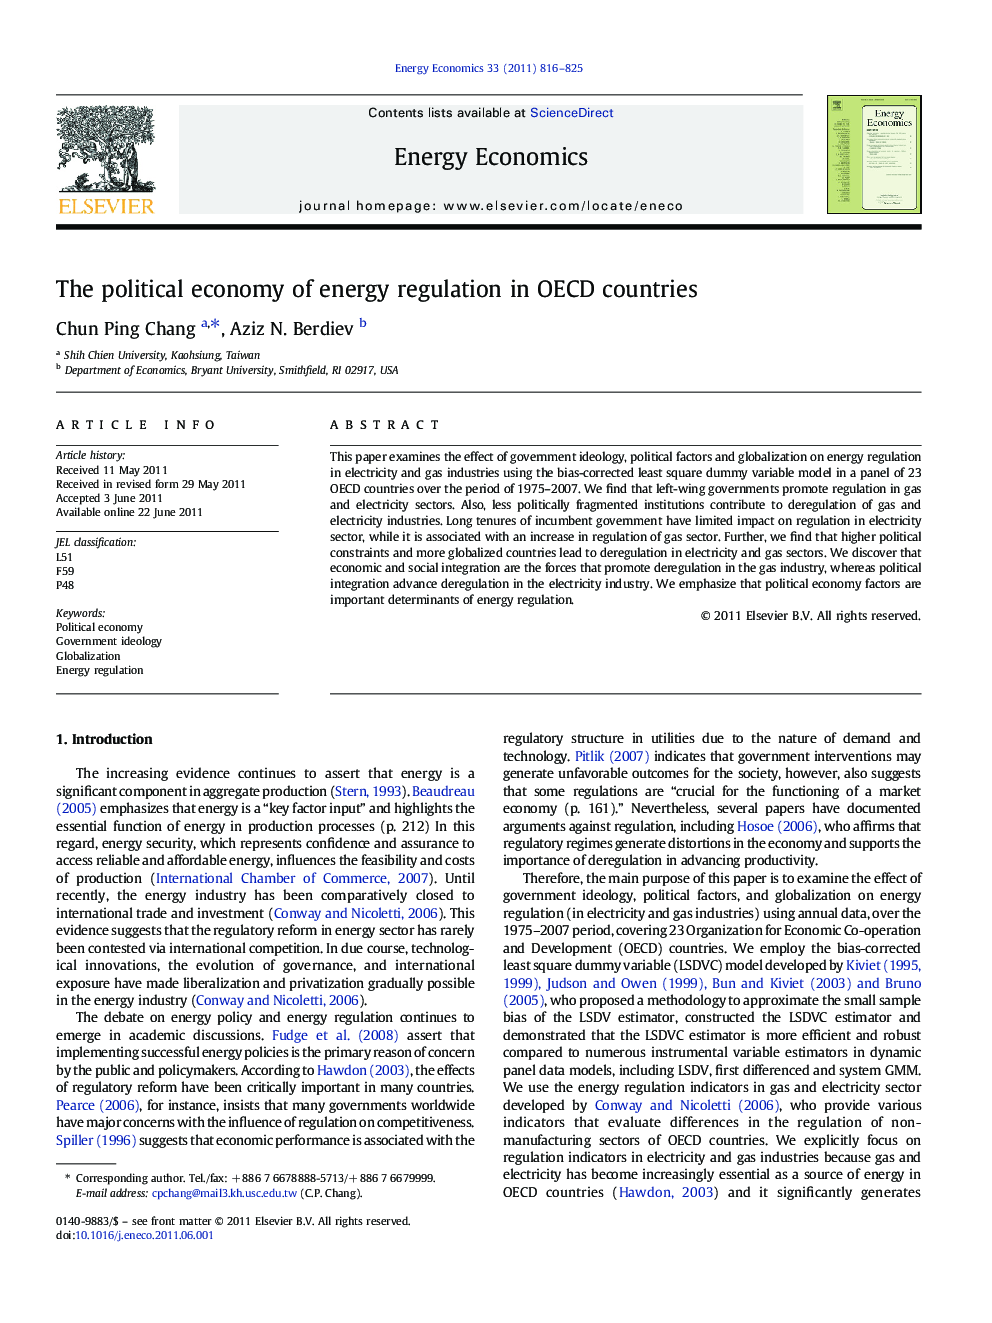 The political economy of energy regulation in OECD countries